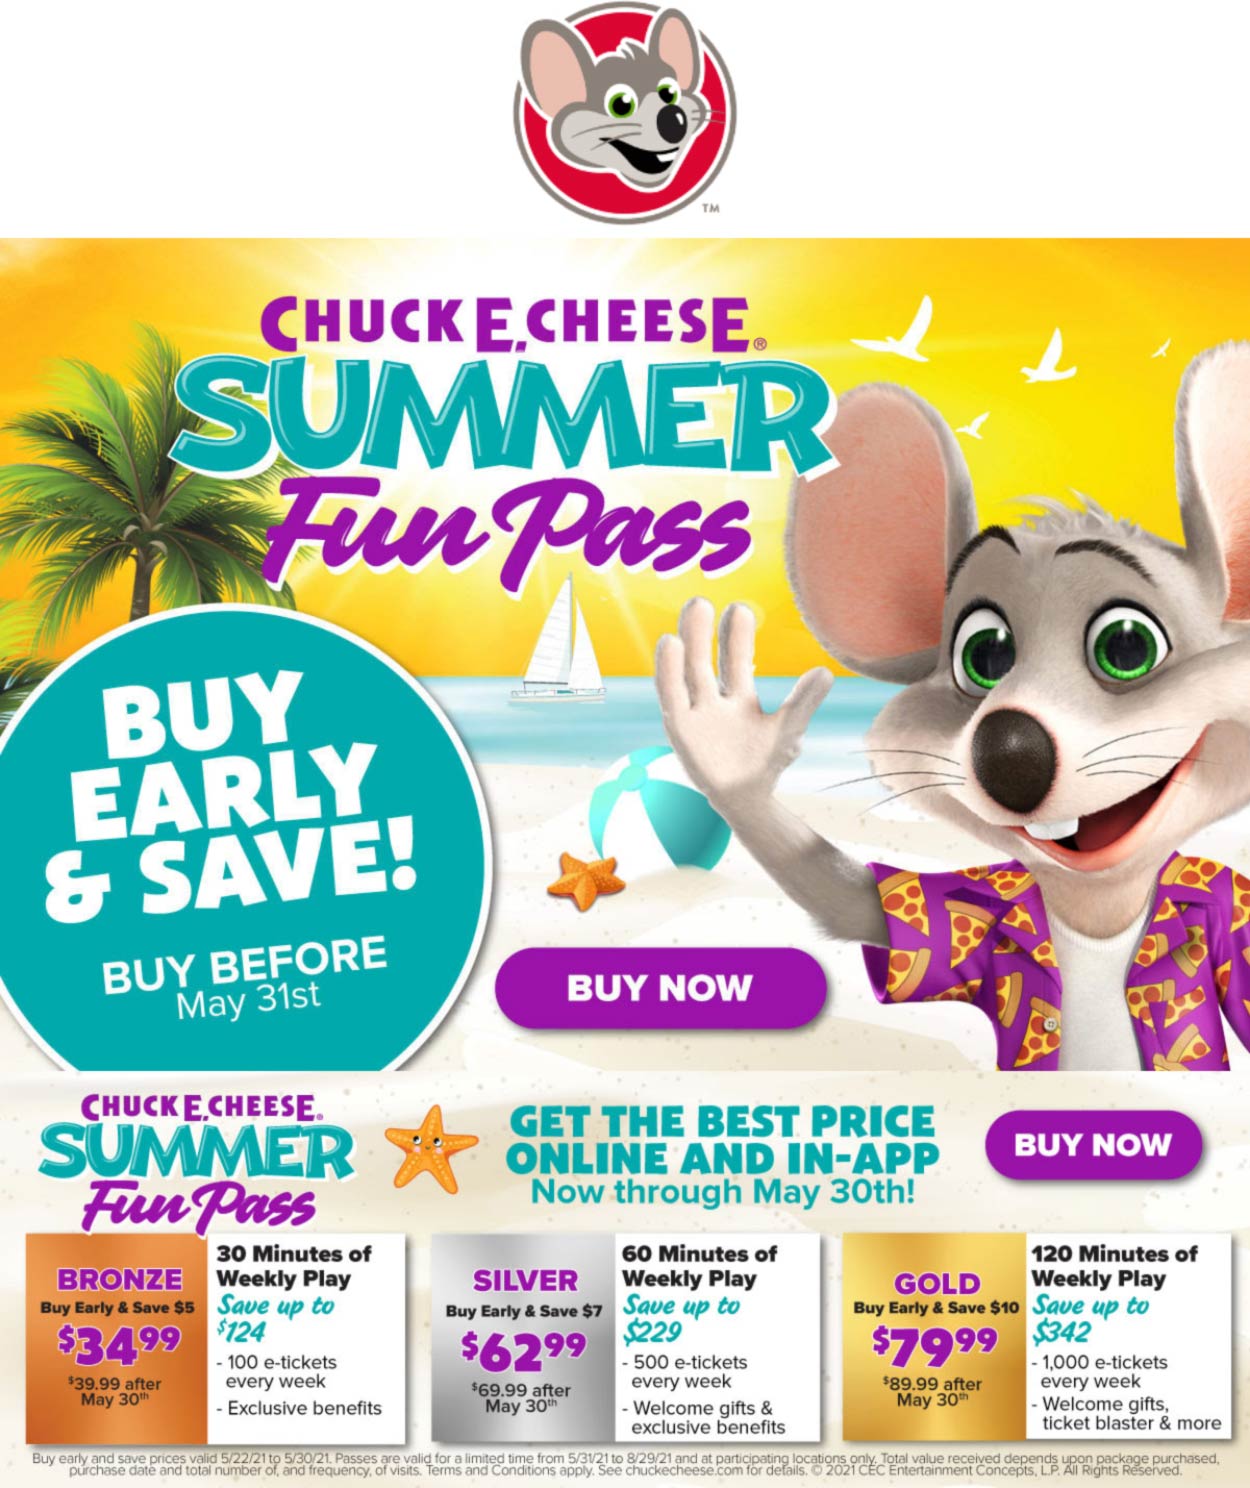 Chuck E. Cheese restaurants Coupon  30min per week of game play all summer for $35 at Chuck E. Cheese pizza #chuckecheese 